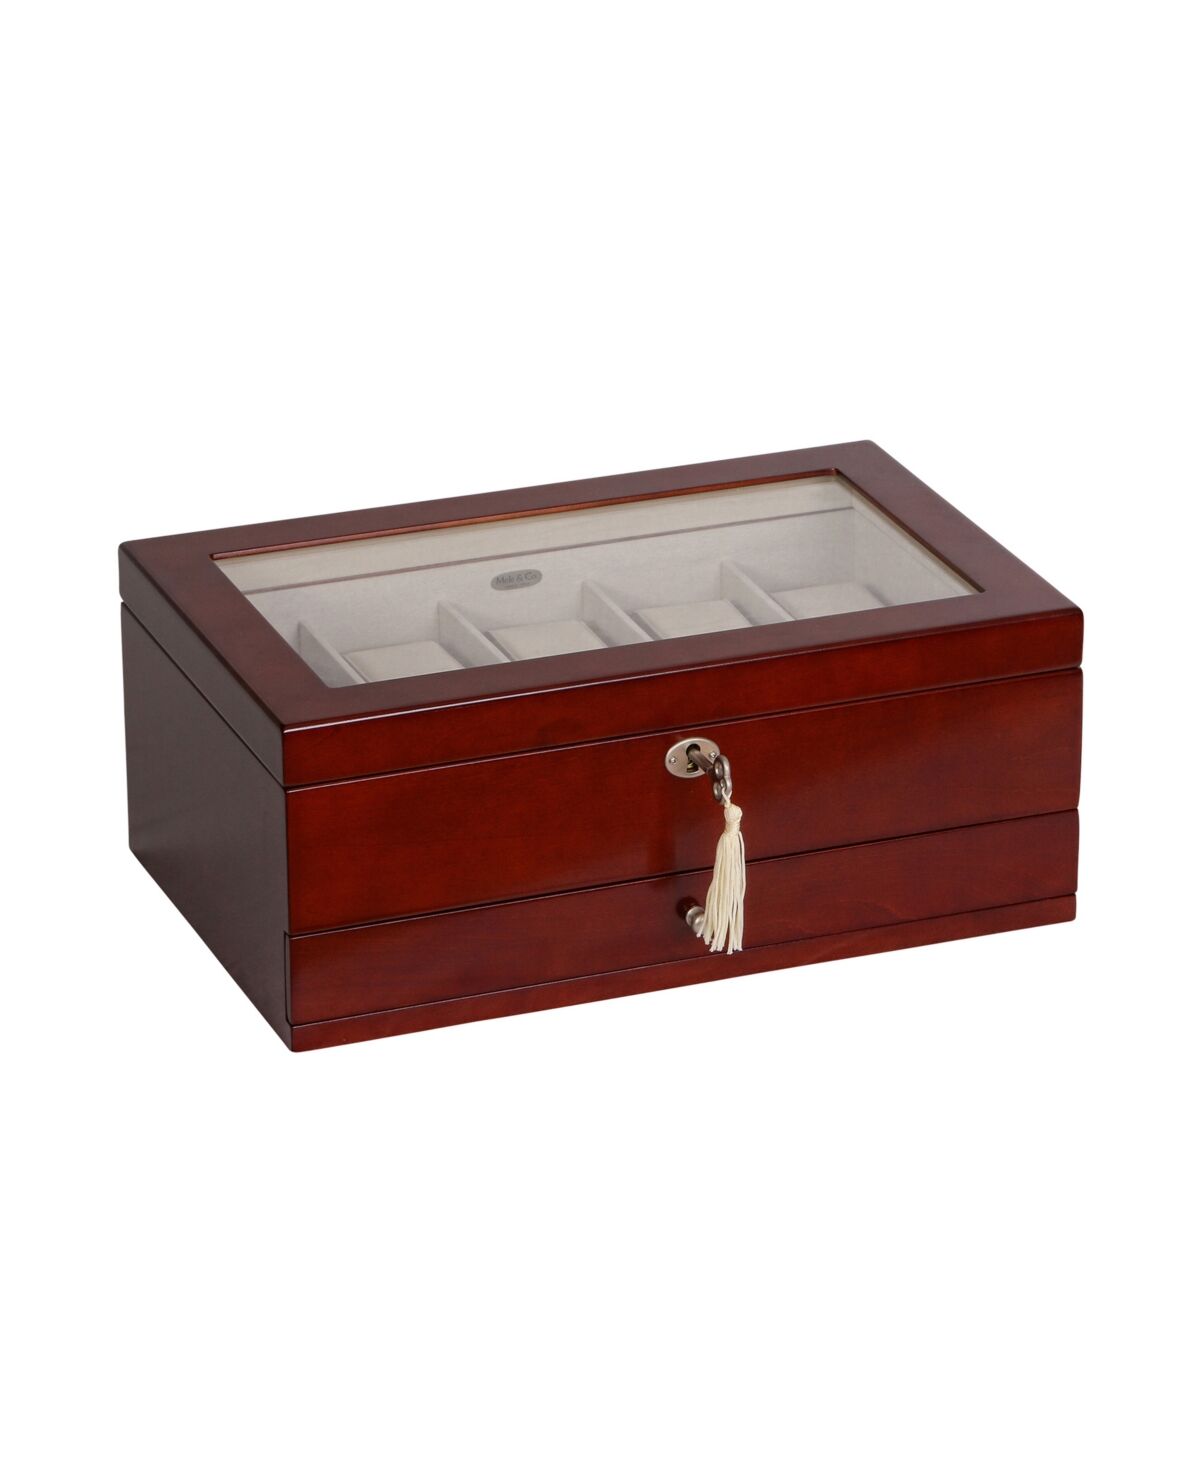 Mele & Co. Christo Glass Top Wooden Watch Box - Brown